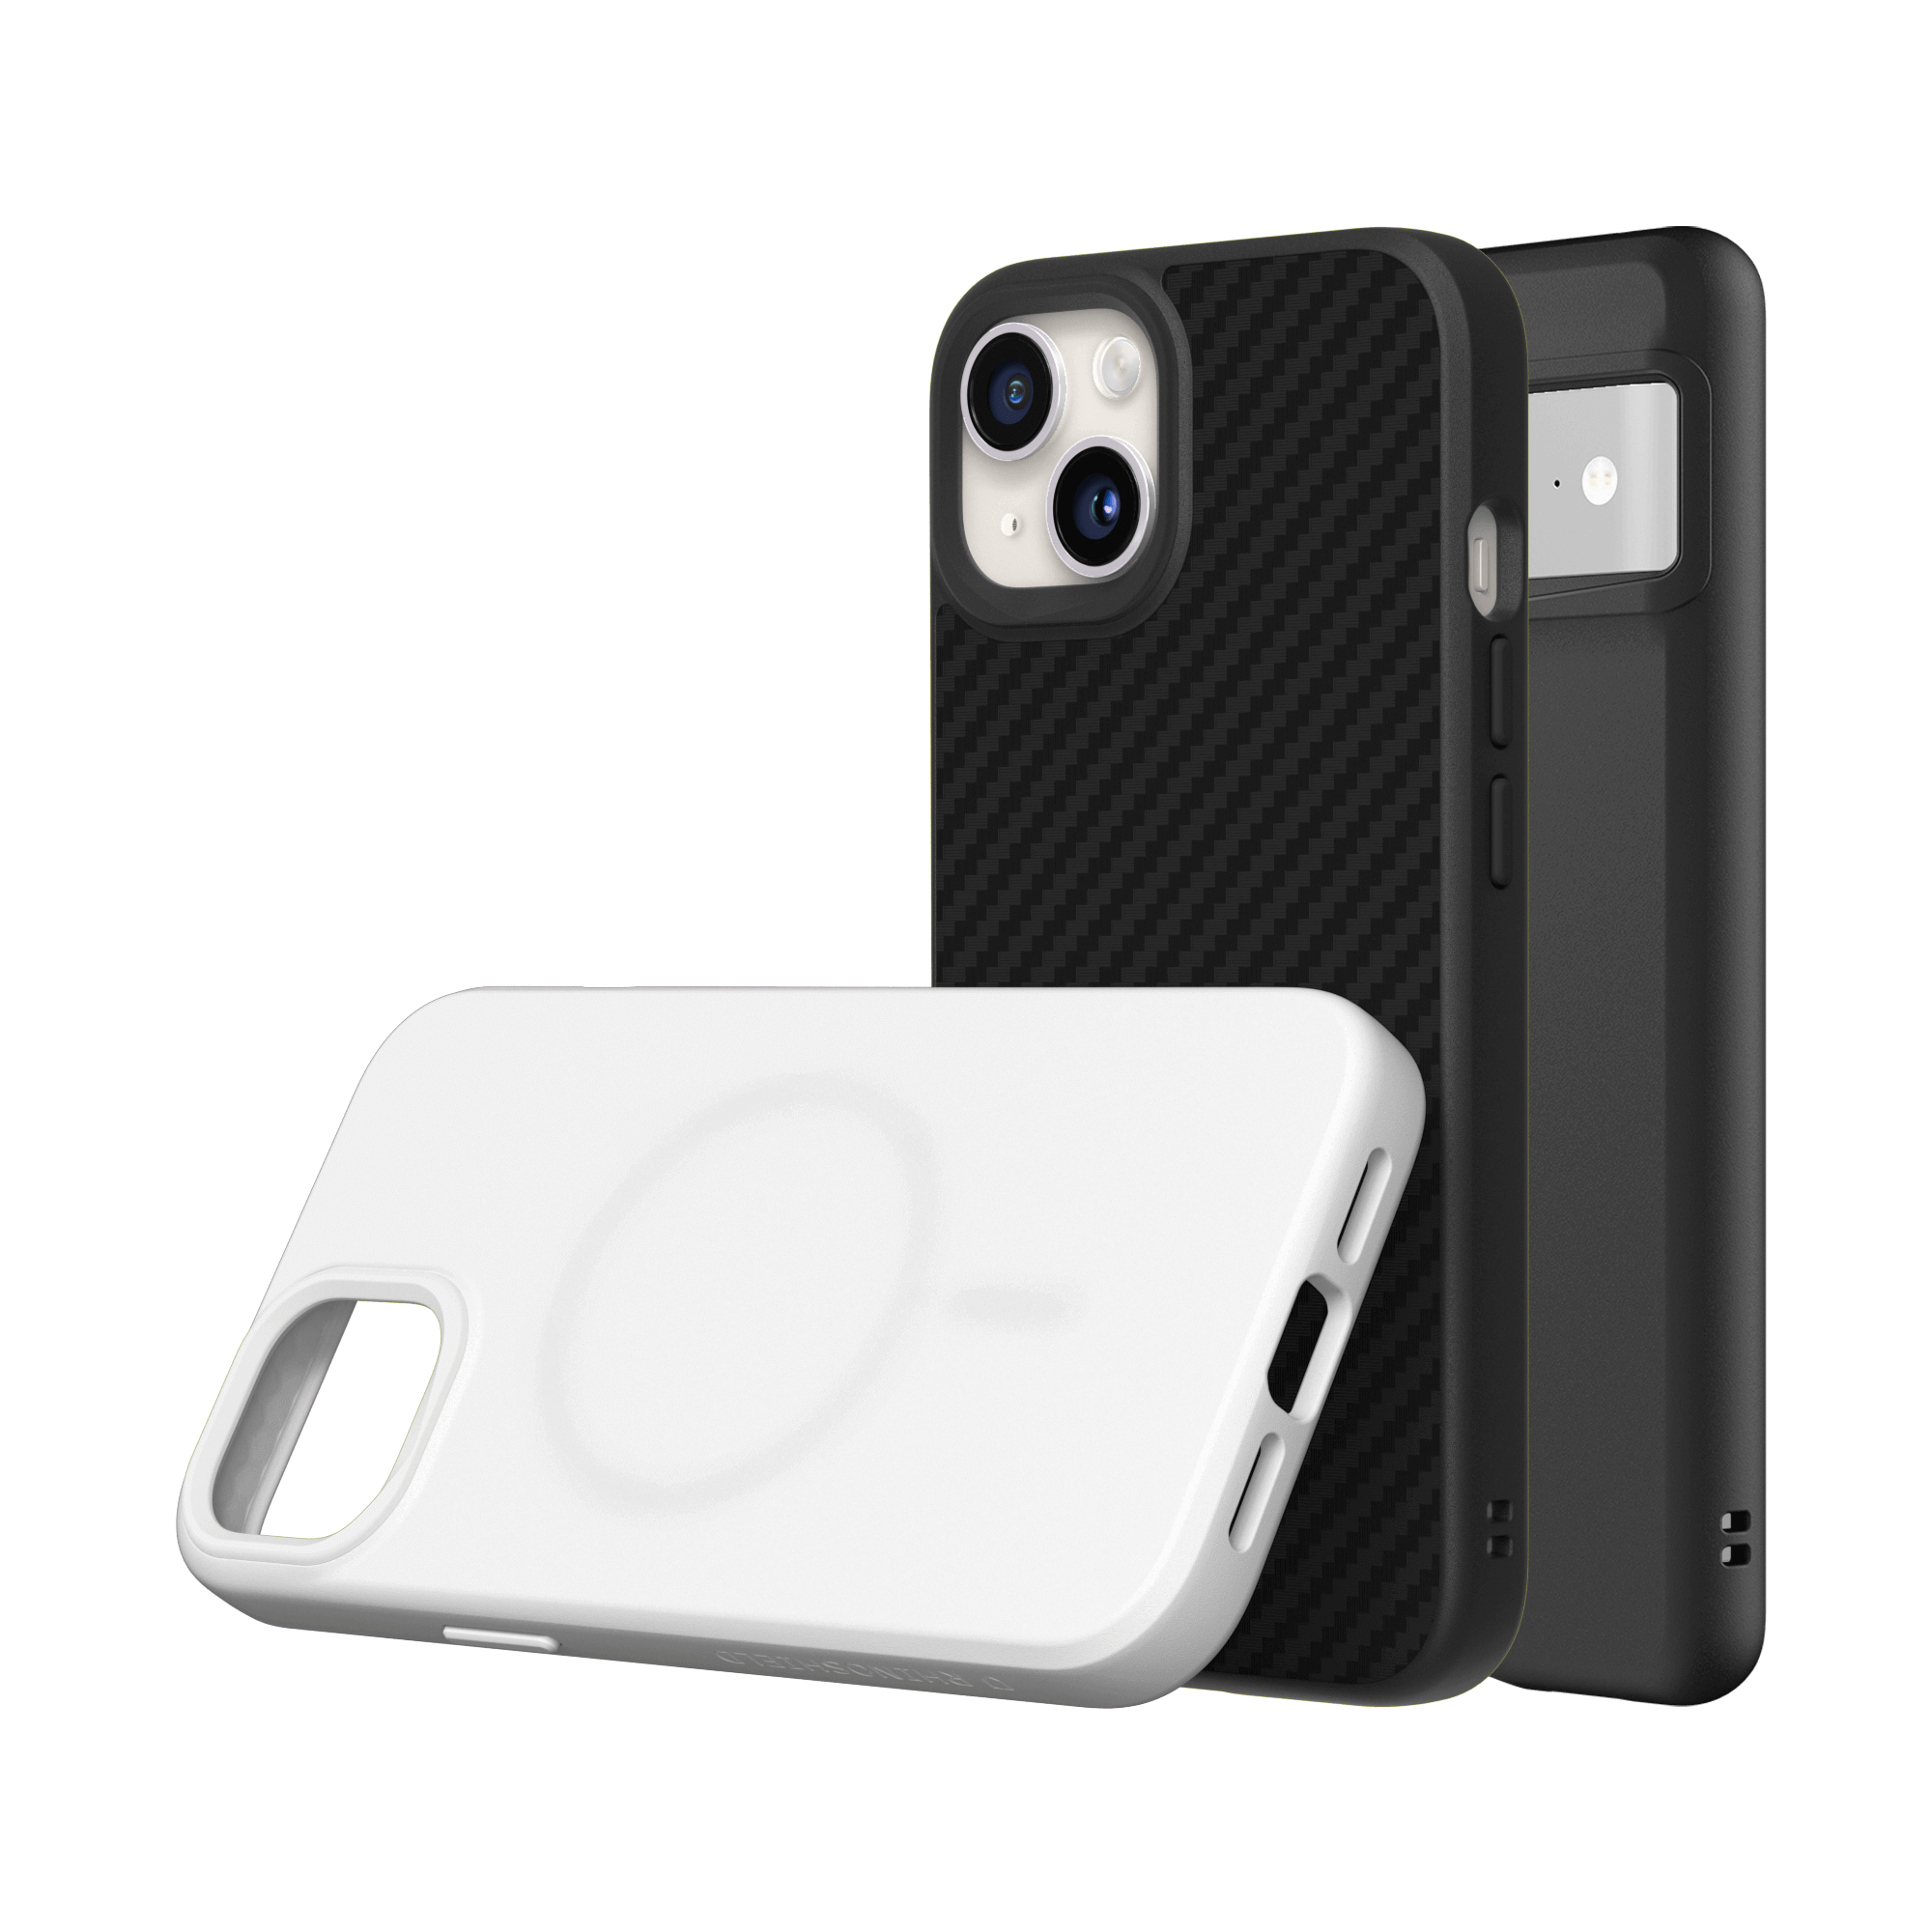 RhinoShield Crystal Clear Case Compatible with [iPhone 12 Pro Max] |  Advanced Yellowing Resistance, High Transparency, Protective and  Customizable